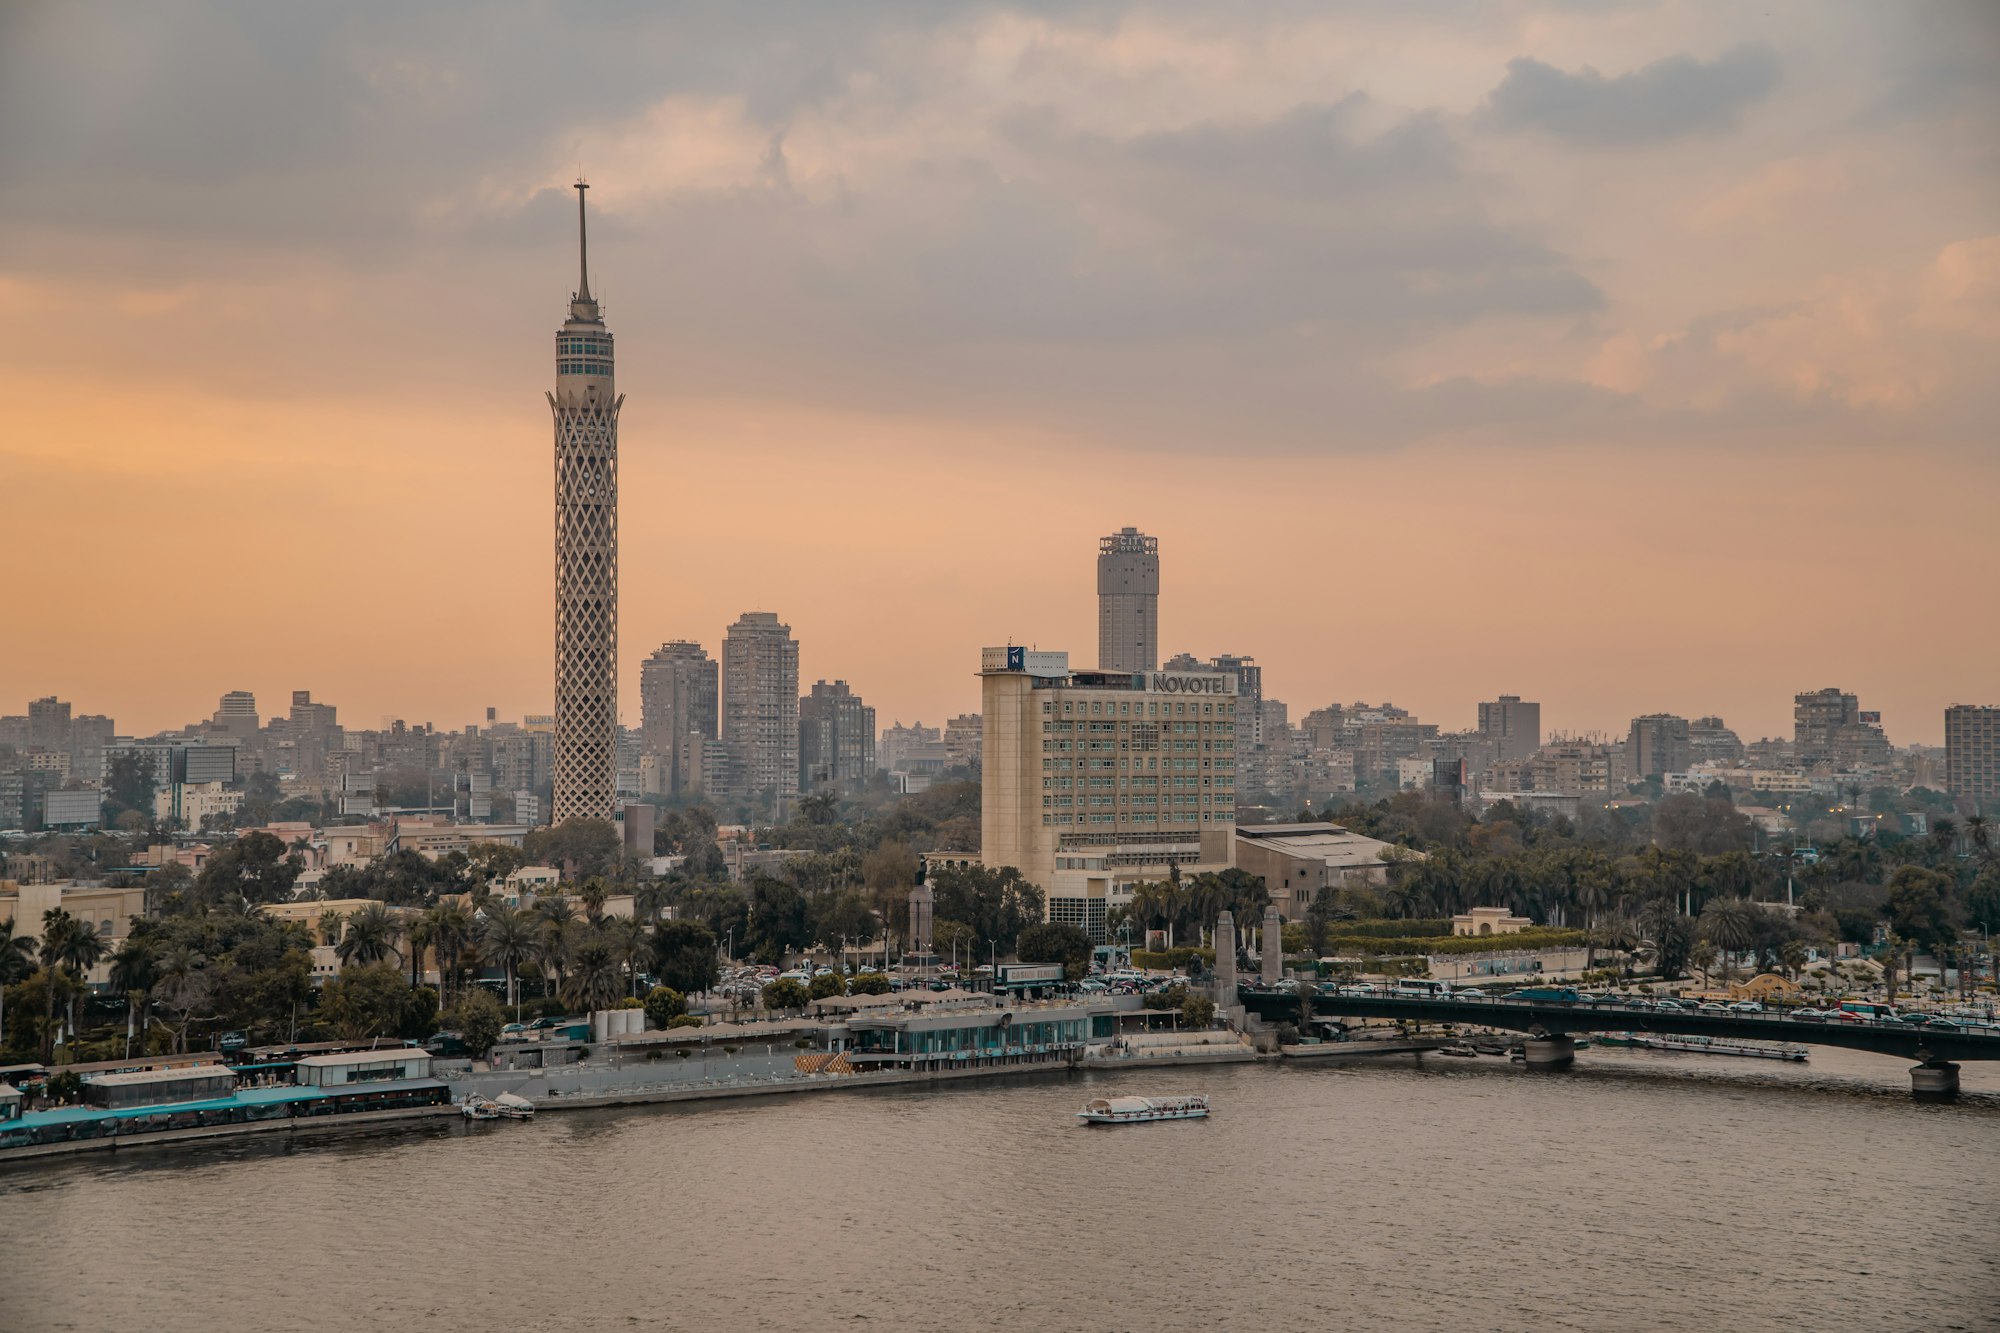 Egypt dominated the Northern African startup funding landscape in 2022